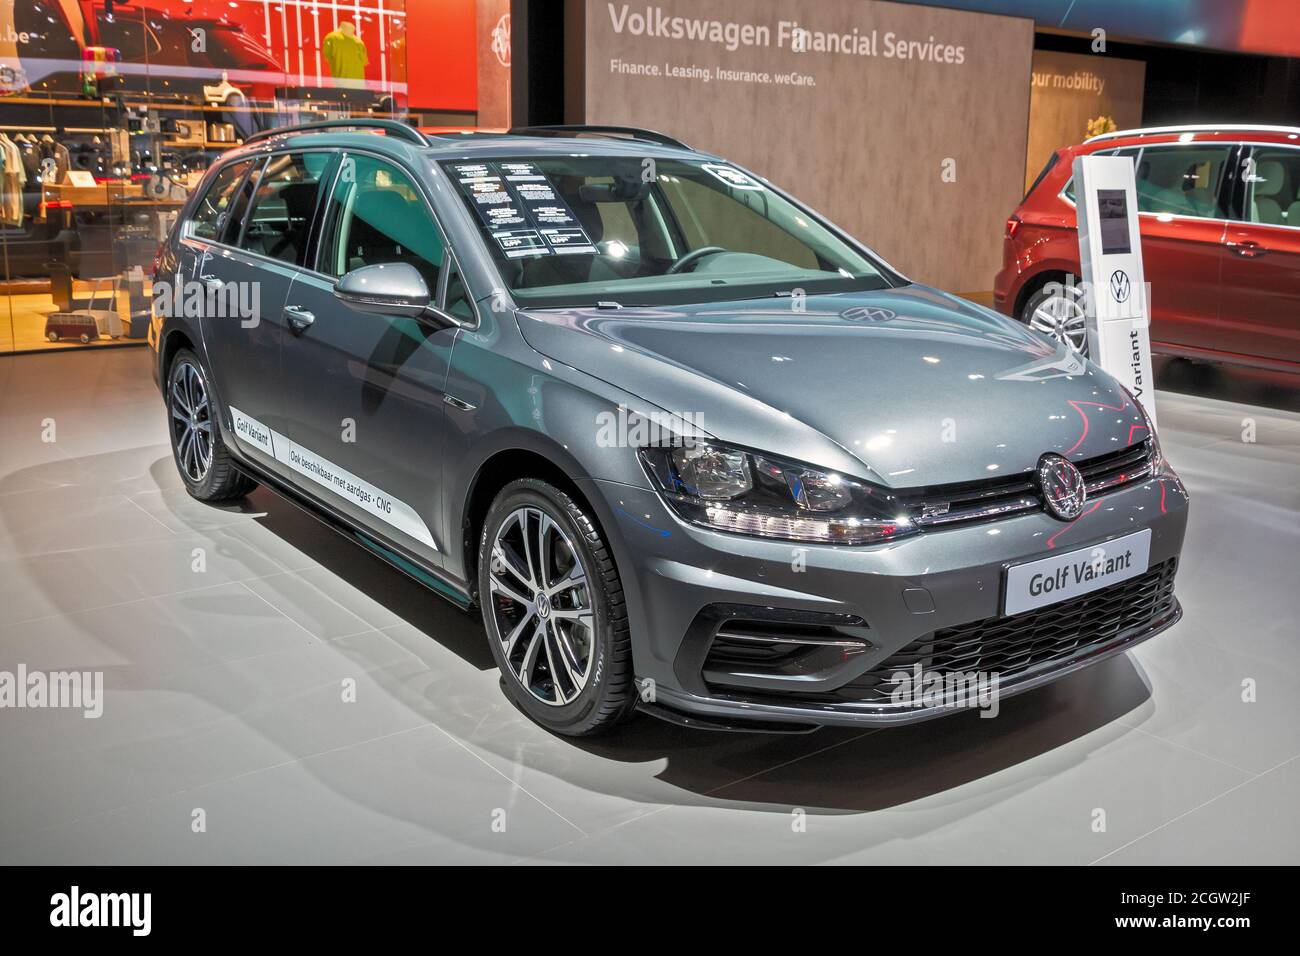 Vw Golf Variant High Resolution Stock Photography and Images - Alamy